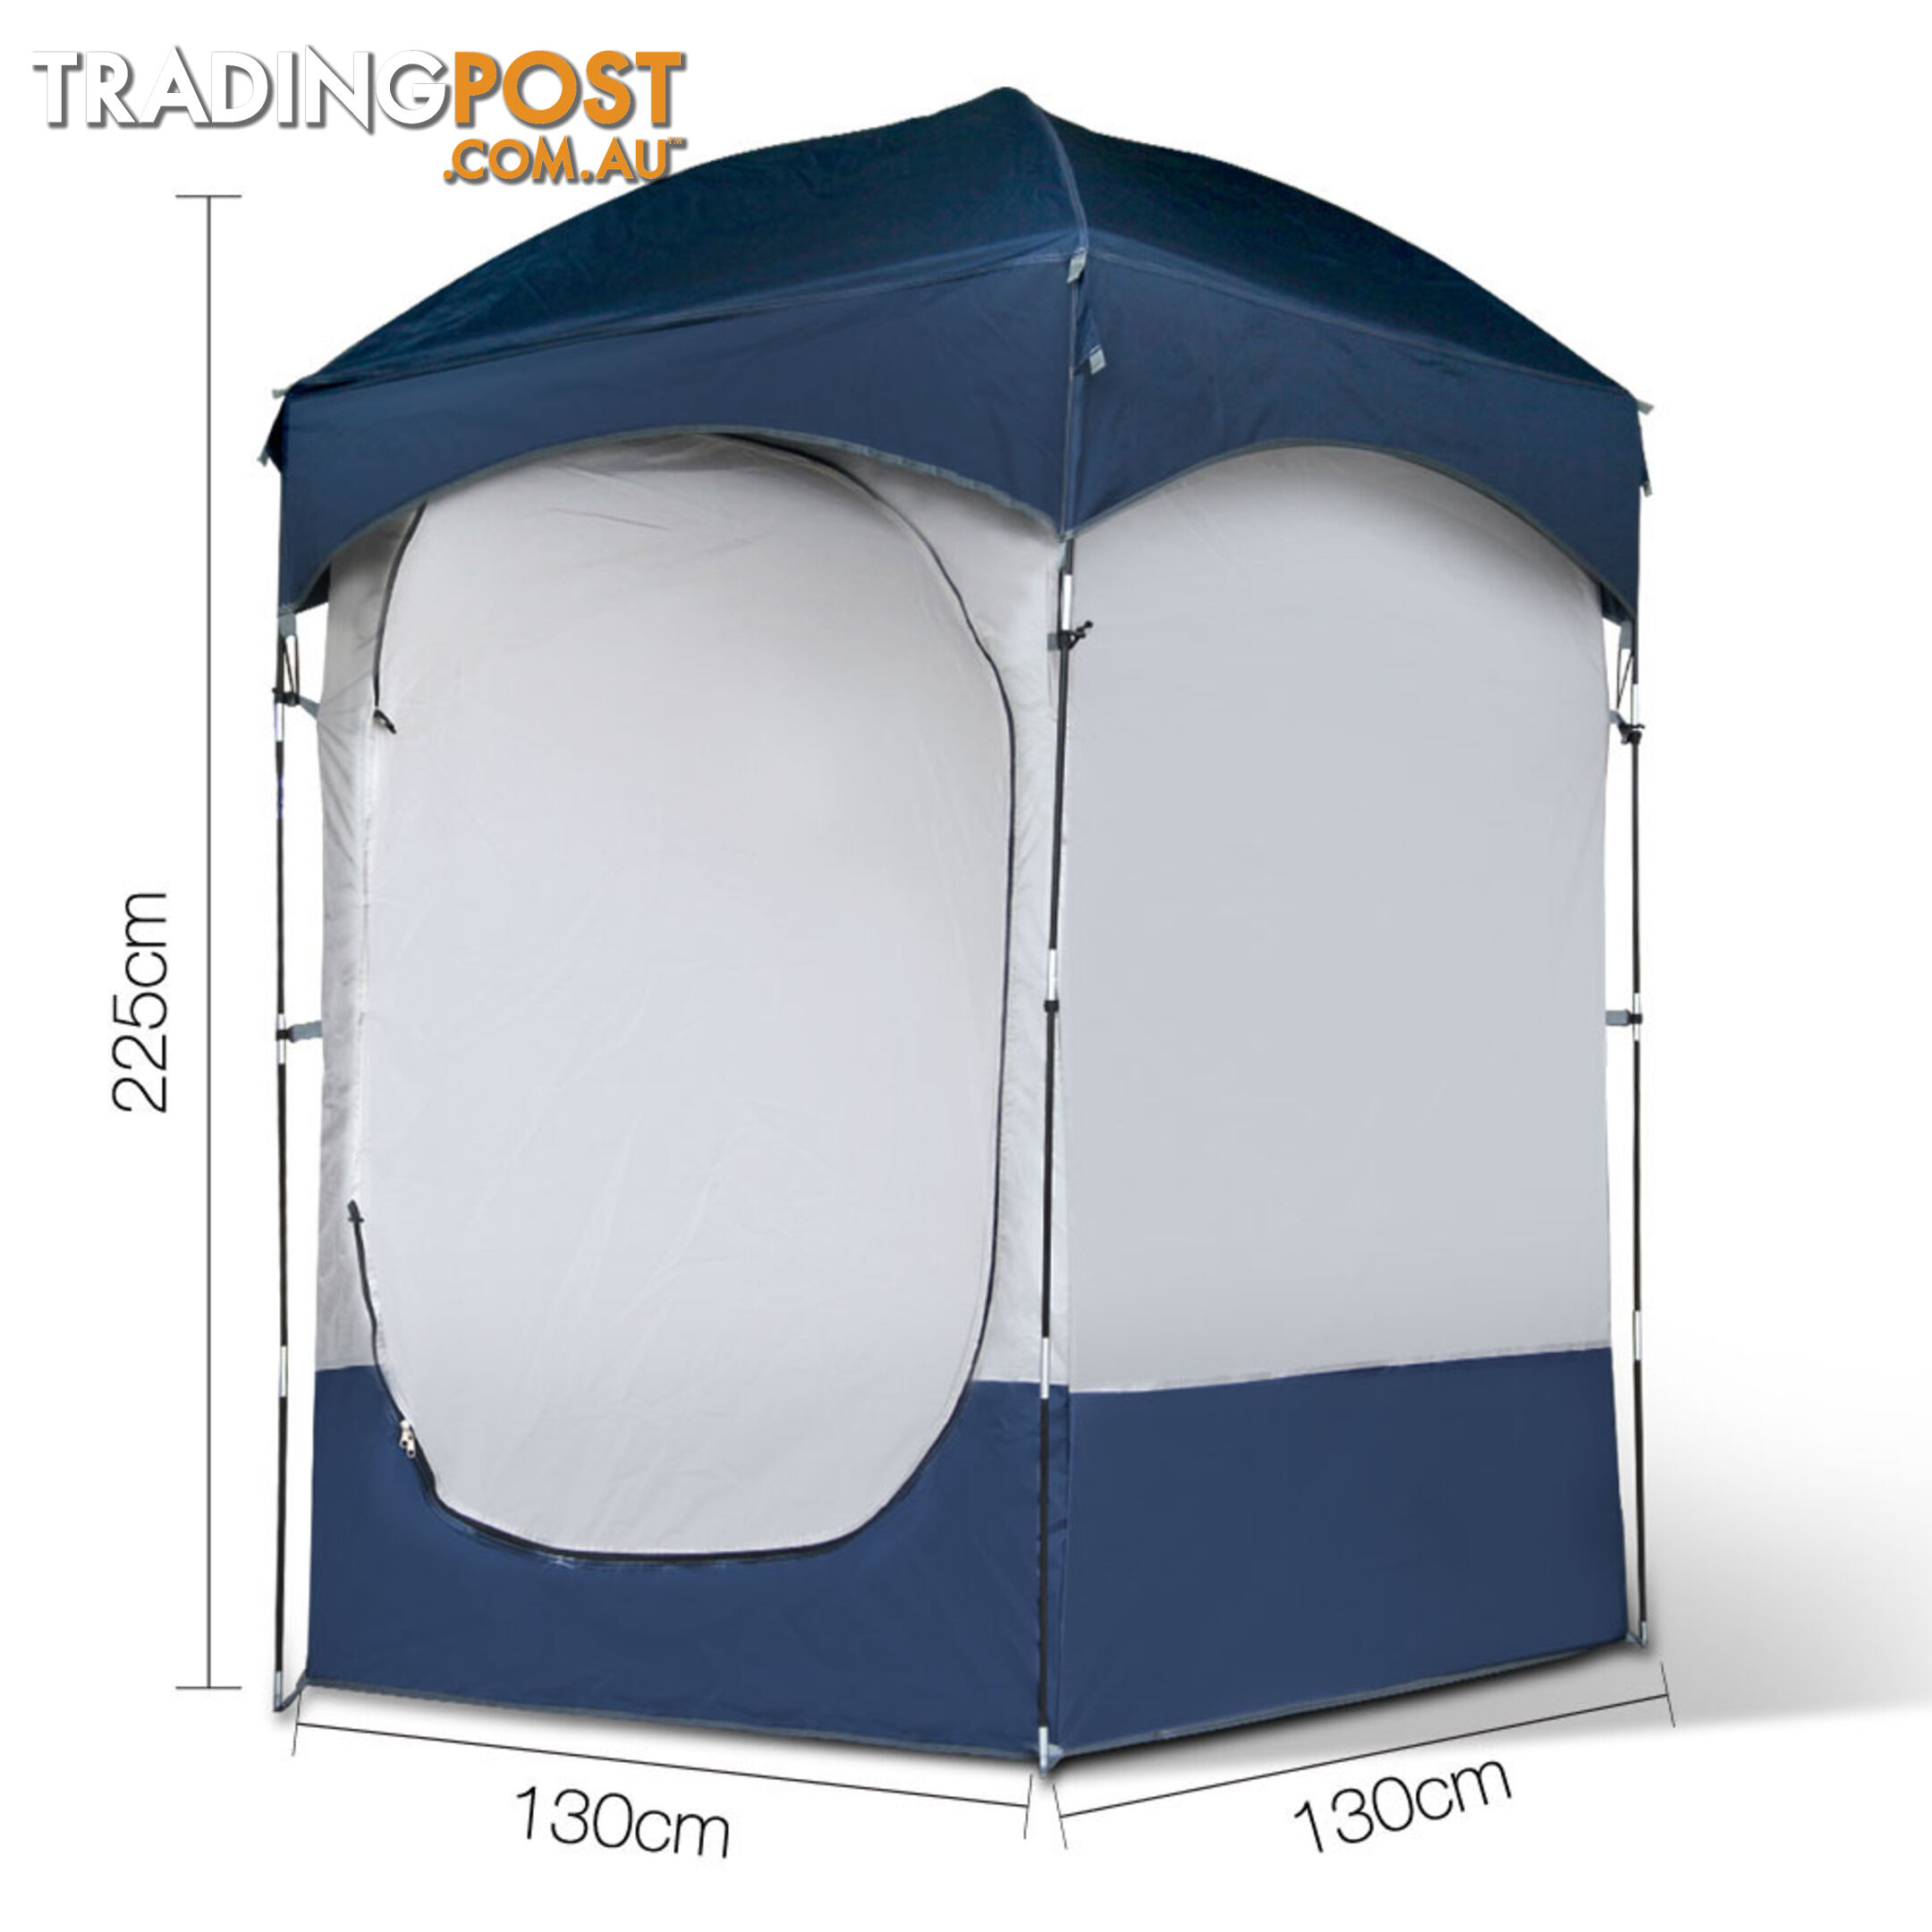 Single Camping Shower Toilet Tent Portable Outdoor Ensuite Change Room Shelter